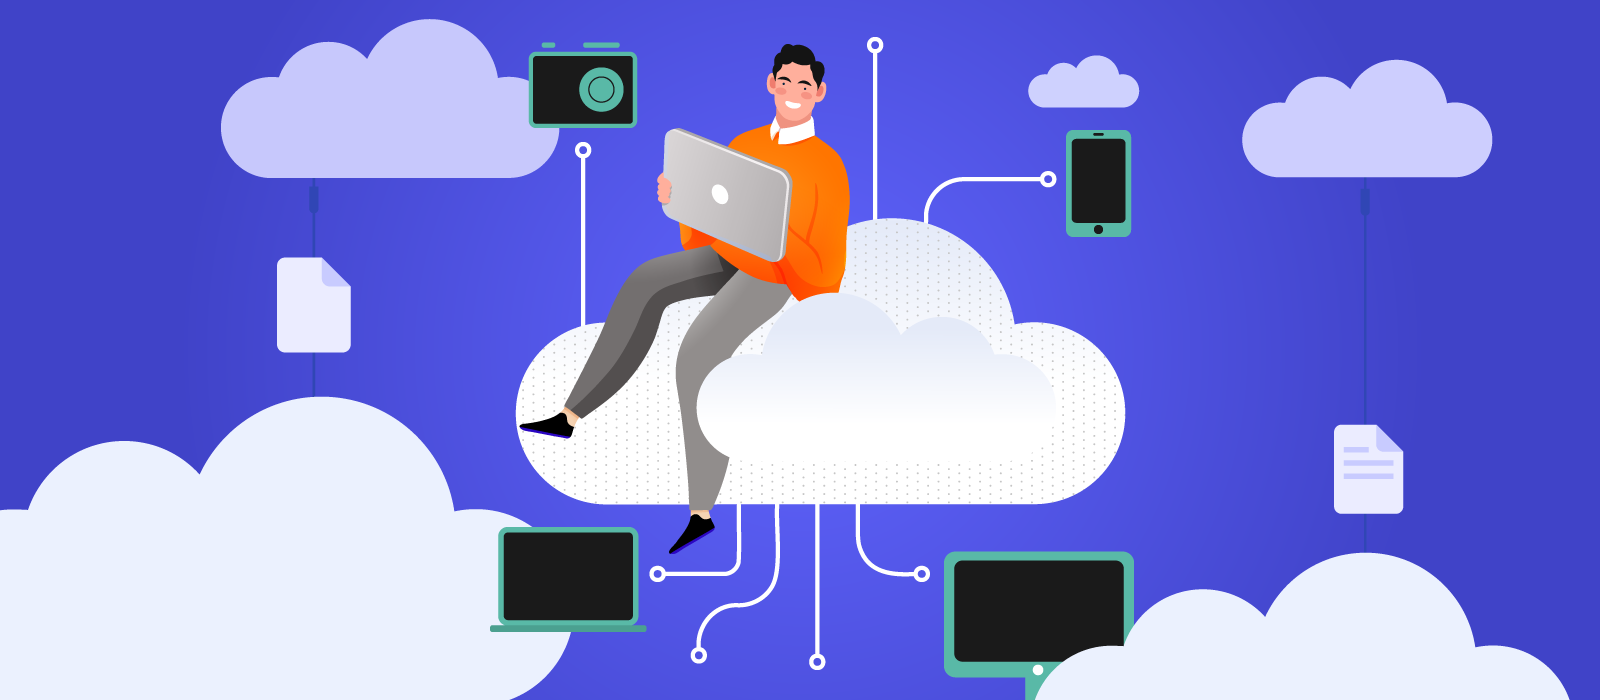 A person using cloud storage sitting on a cloud